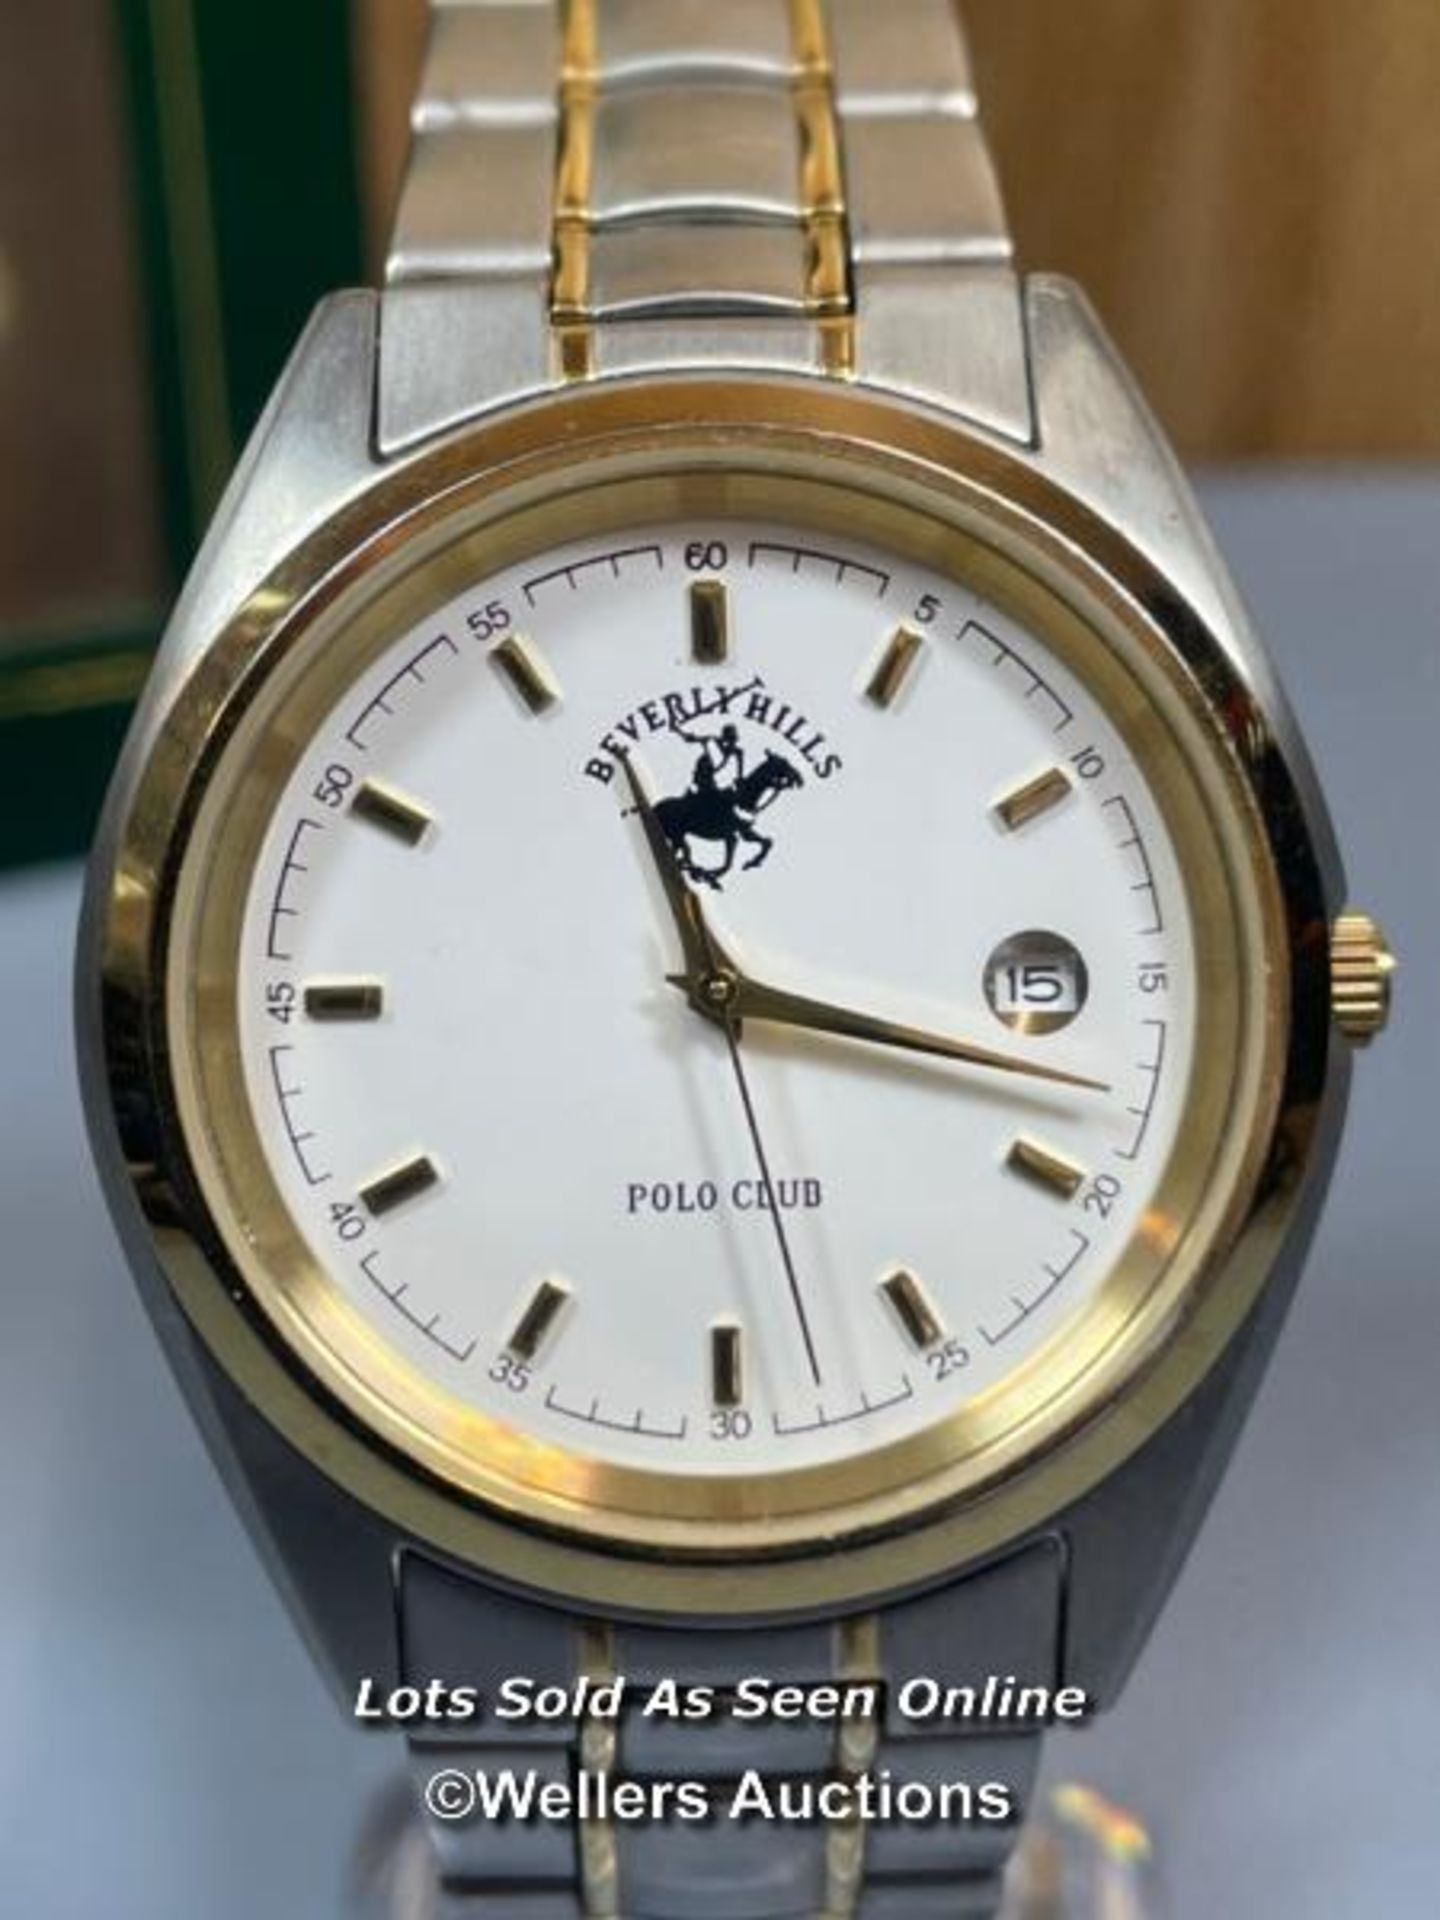 POLO GB 0147 W/R. 3 ATM. WATCH IN BOX SET (WITHOUT THE PEN)